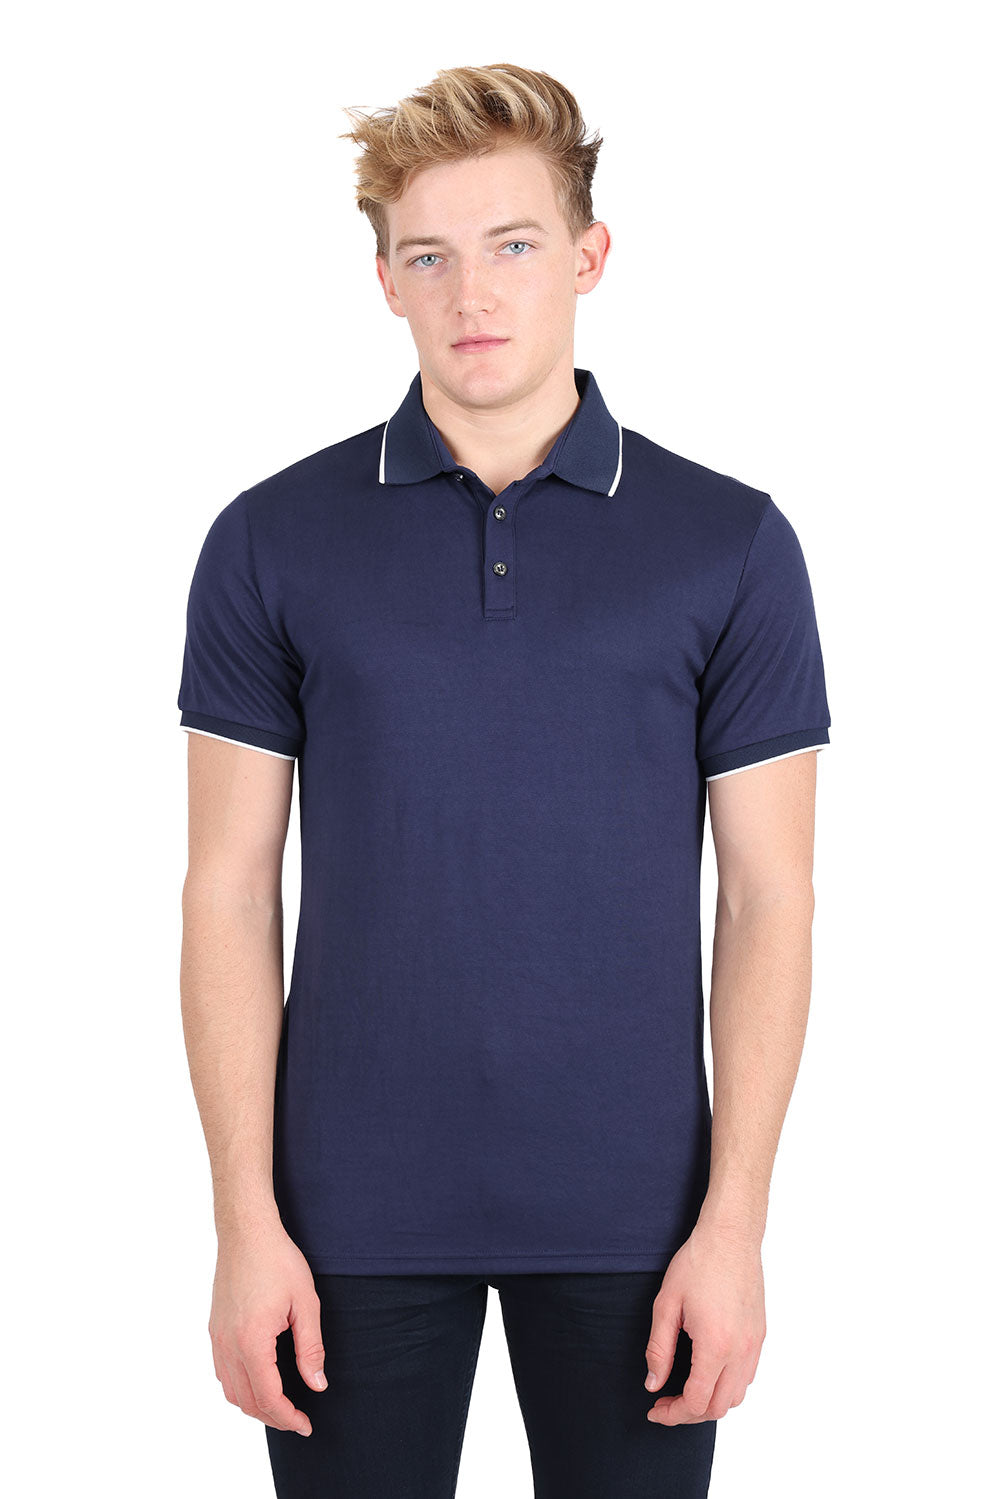 Barabas Men's Solid Color Luxury Short Sleeves Polo Shirts 2PP825 Navy